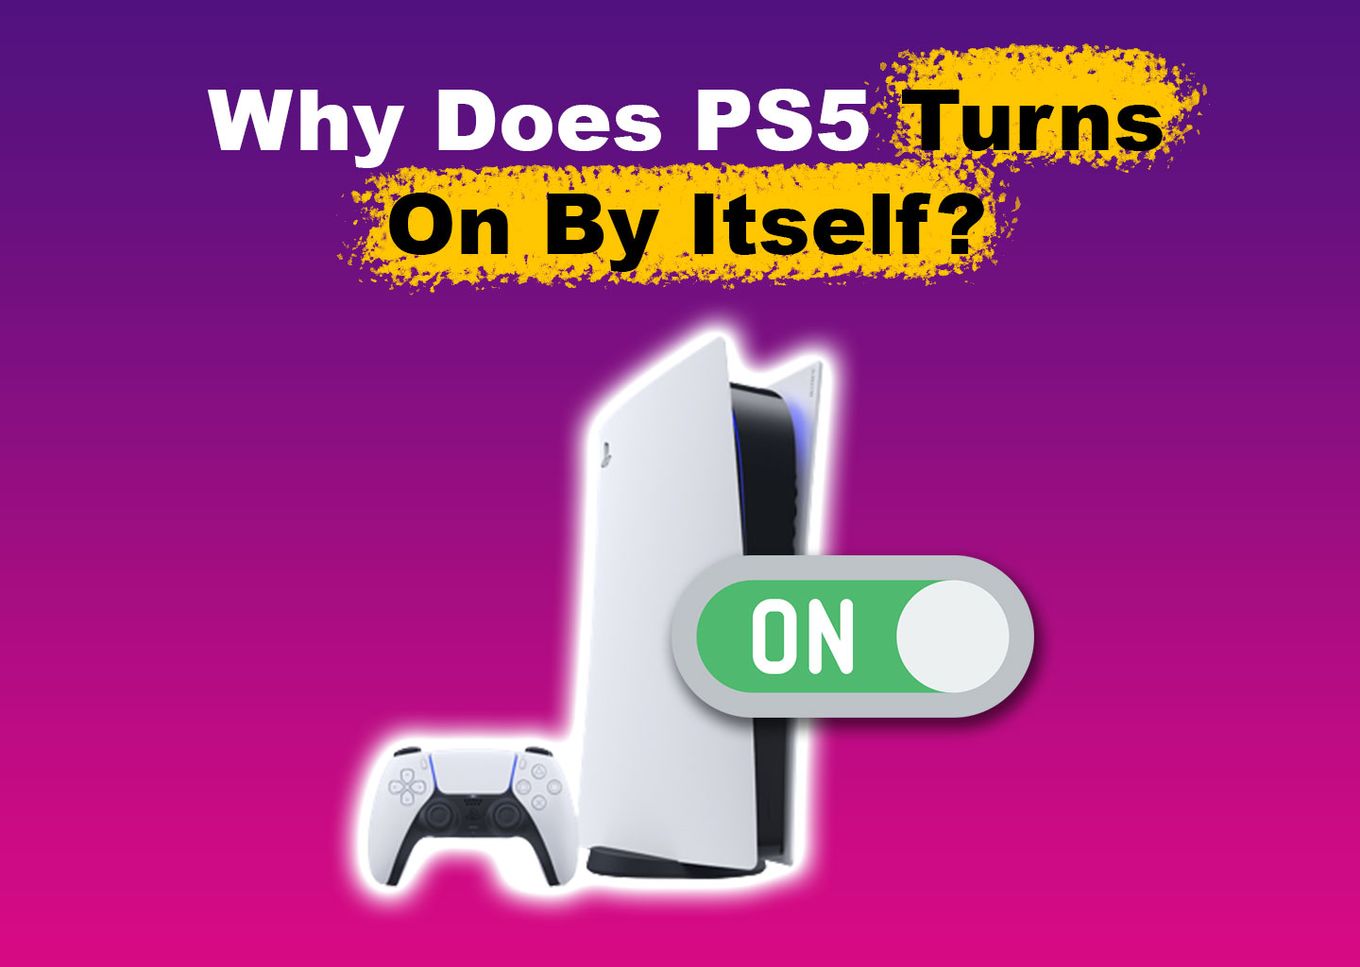 PS5 Turns on By Itself